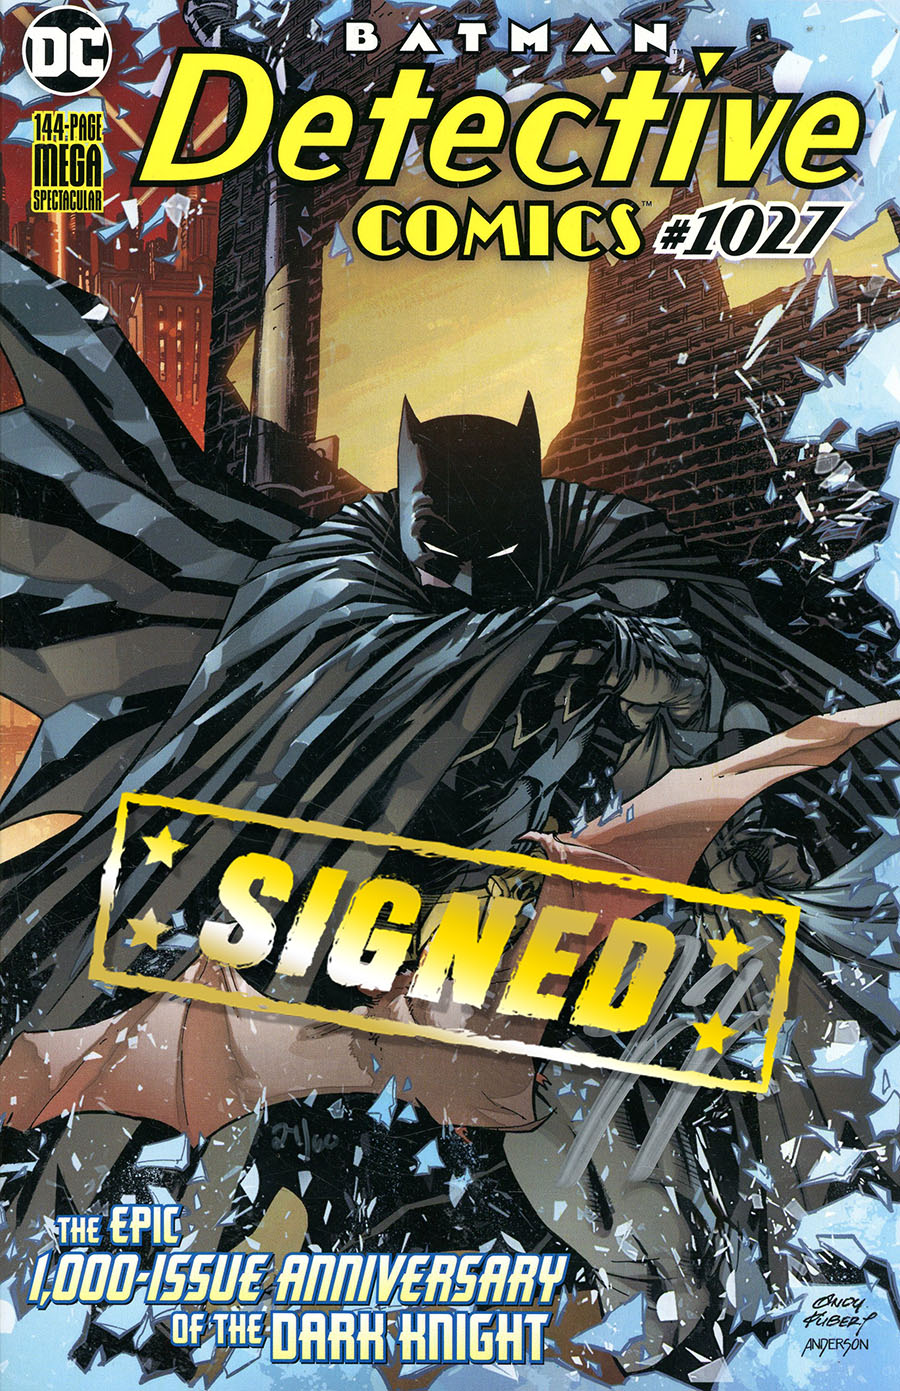 Detective Comics Vol 2 #1027 Cover O DF Signed By James Tynion IV